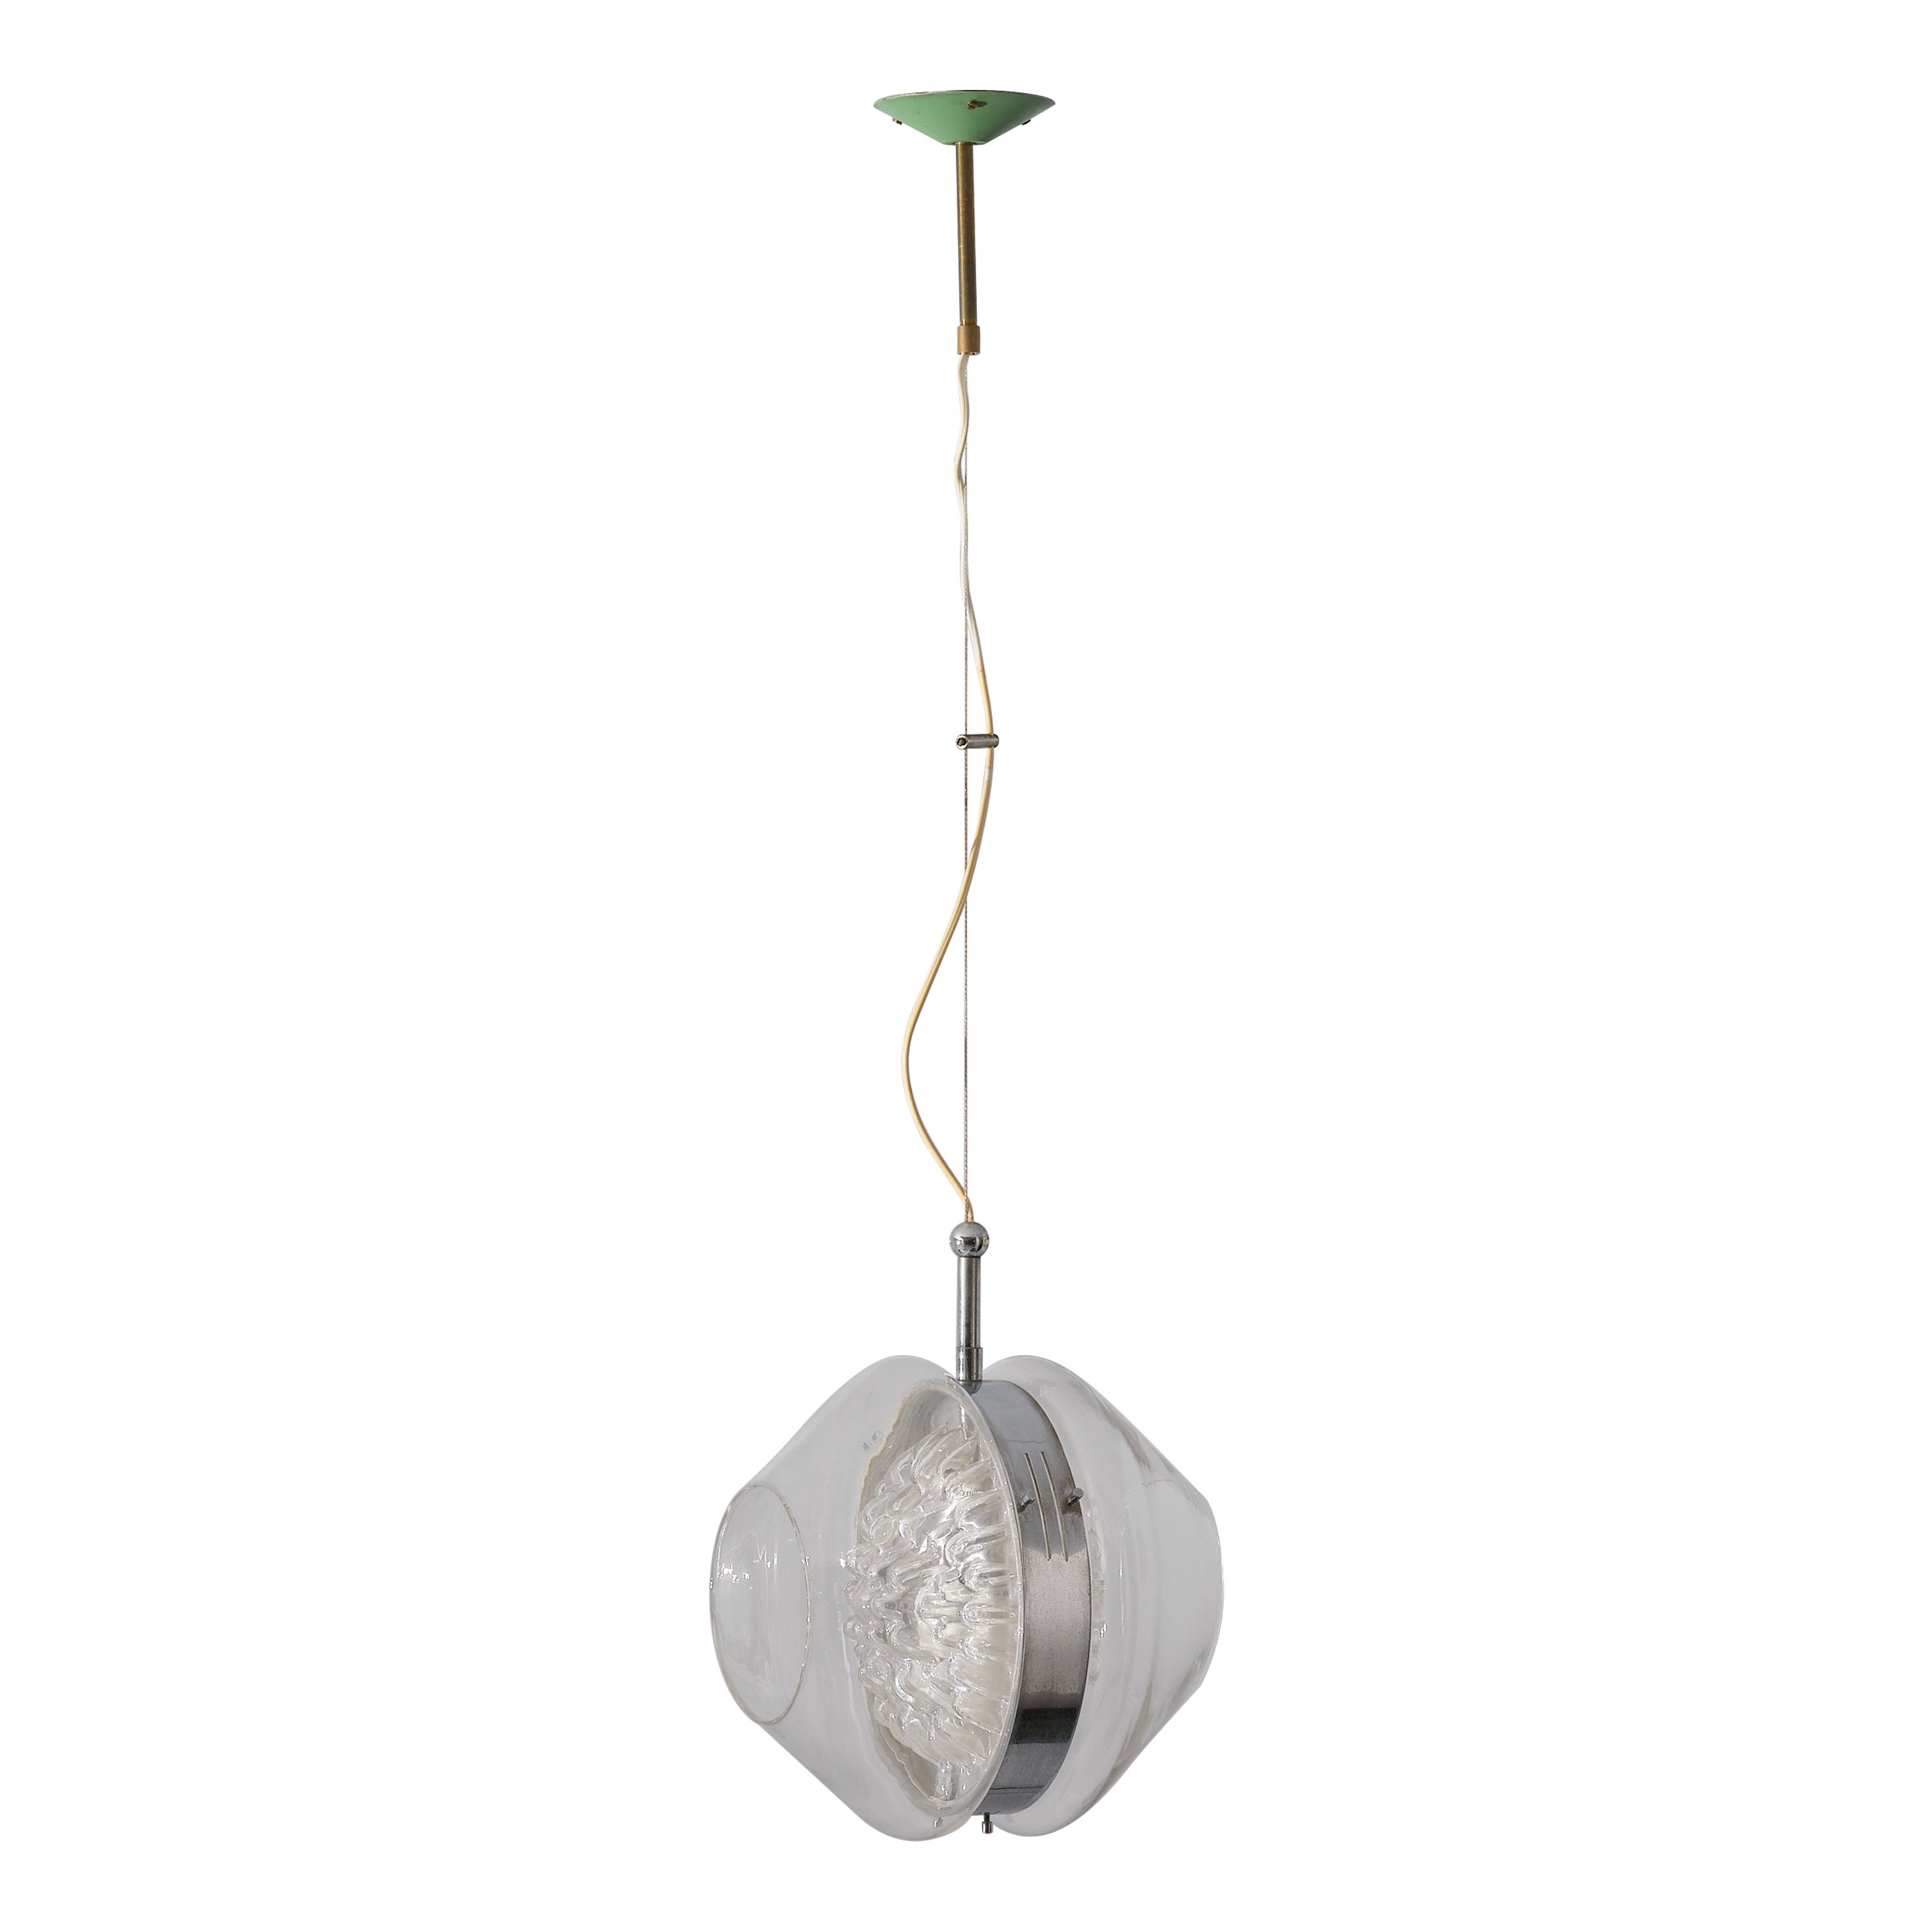 Italian Pendant Lamp, Murano Glass and Brass, Modern Design of the 60s For Sale